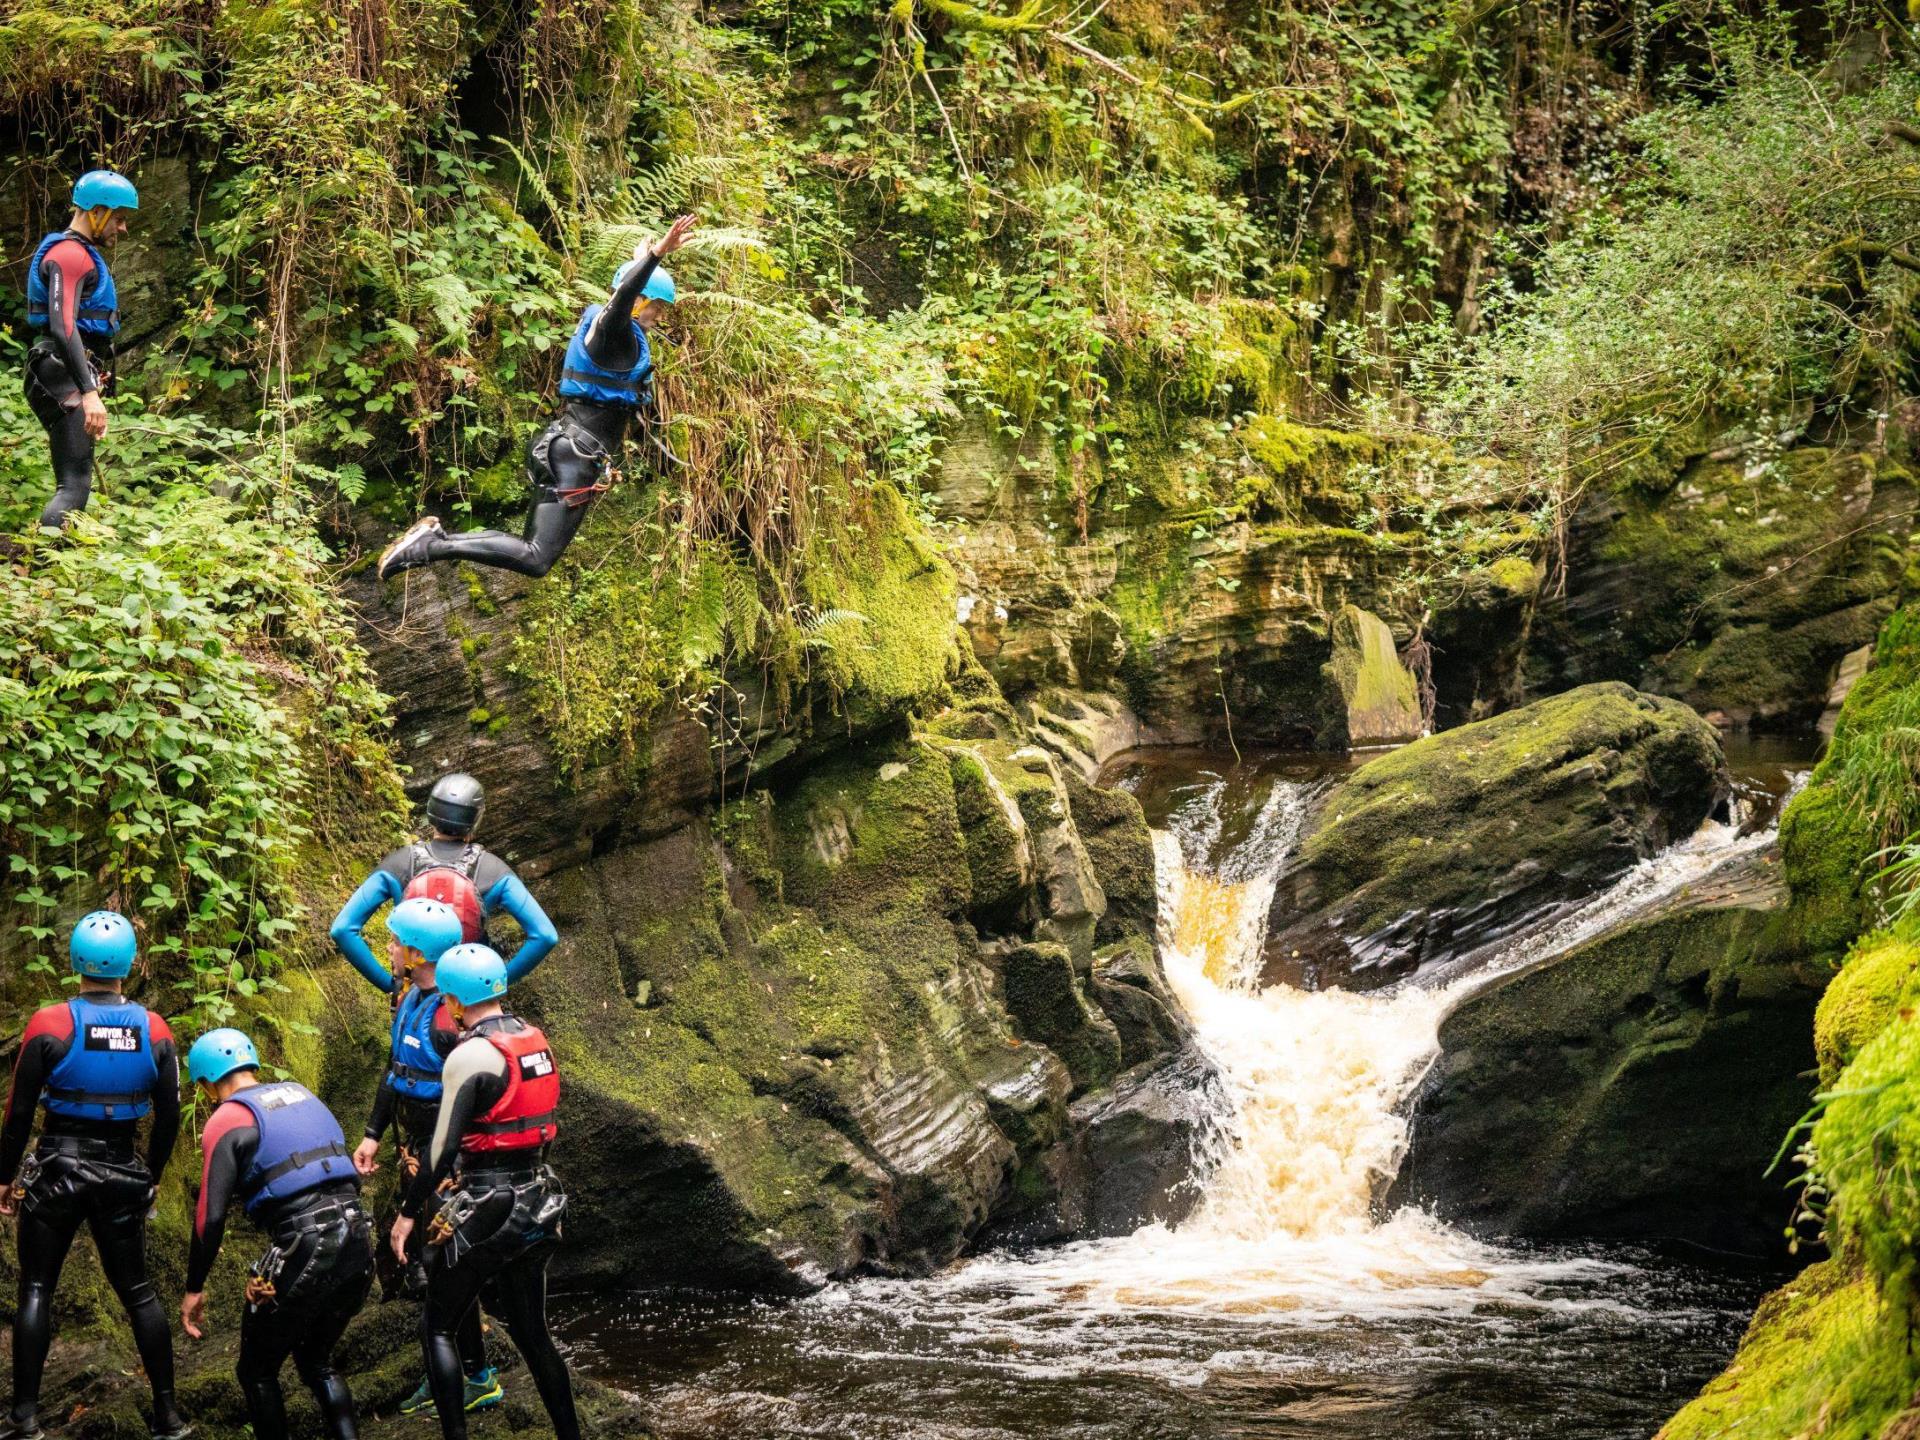 Canyoning on an adventure holiday in Wales